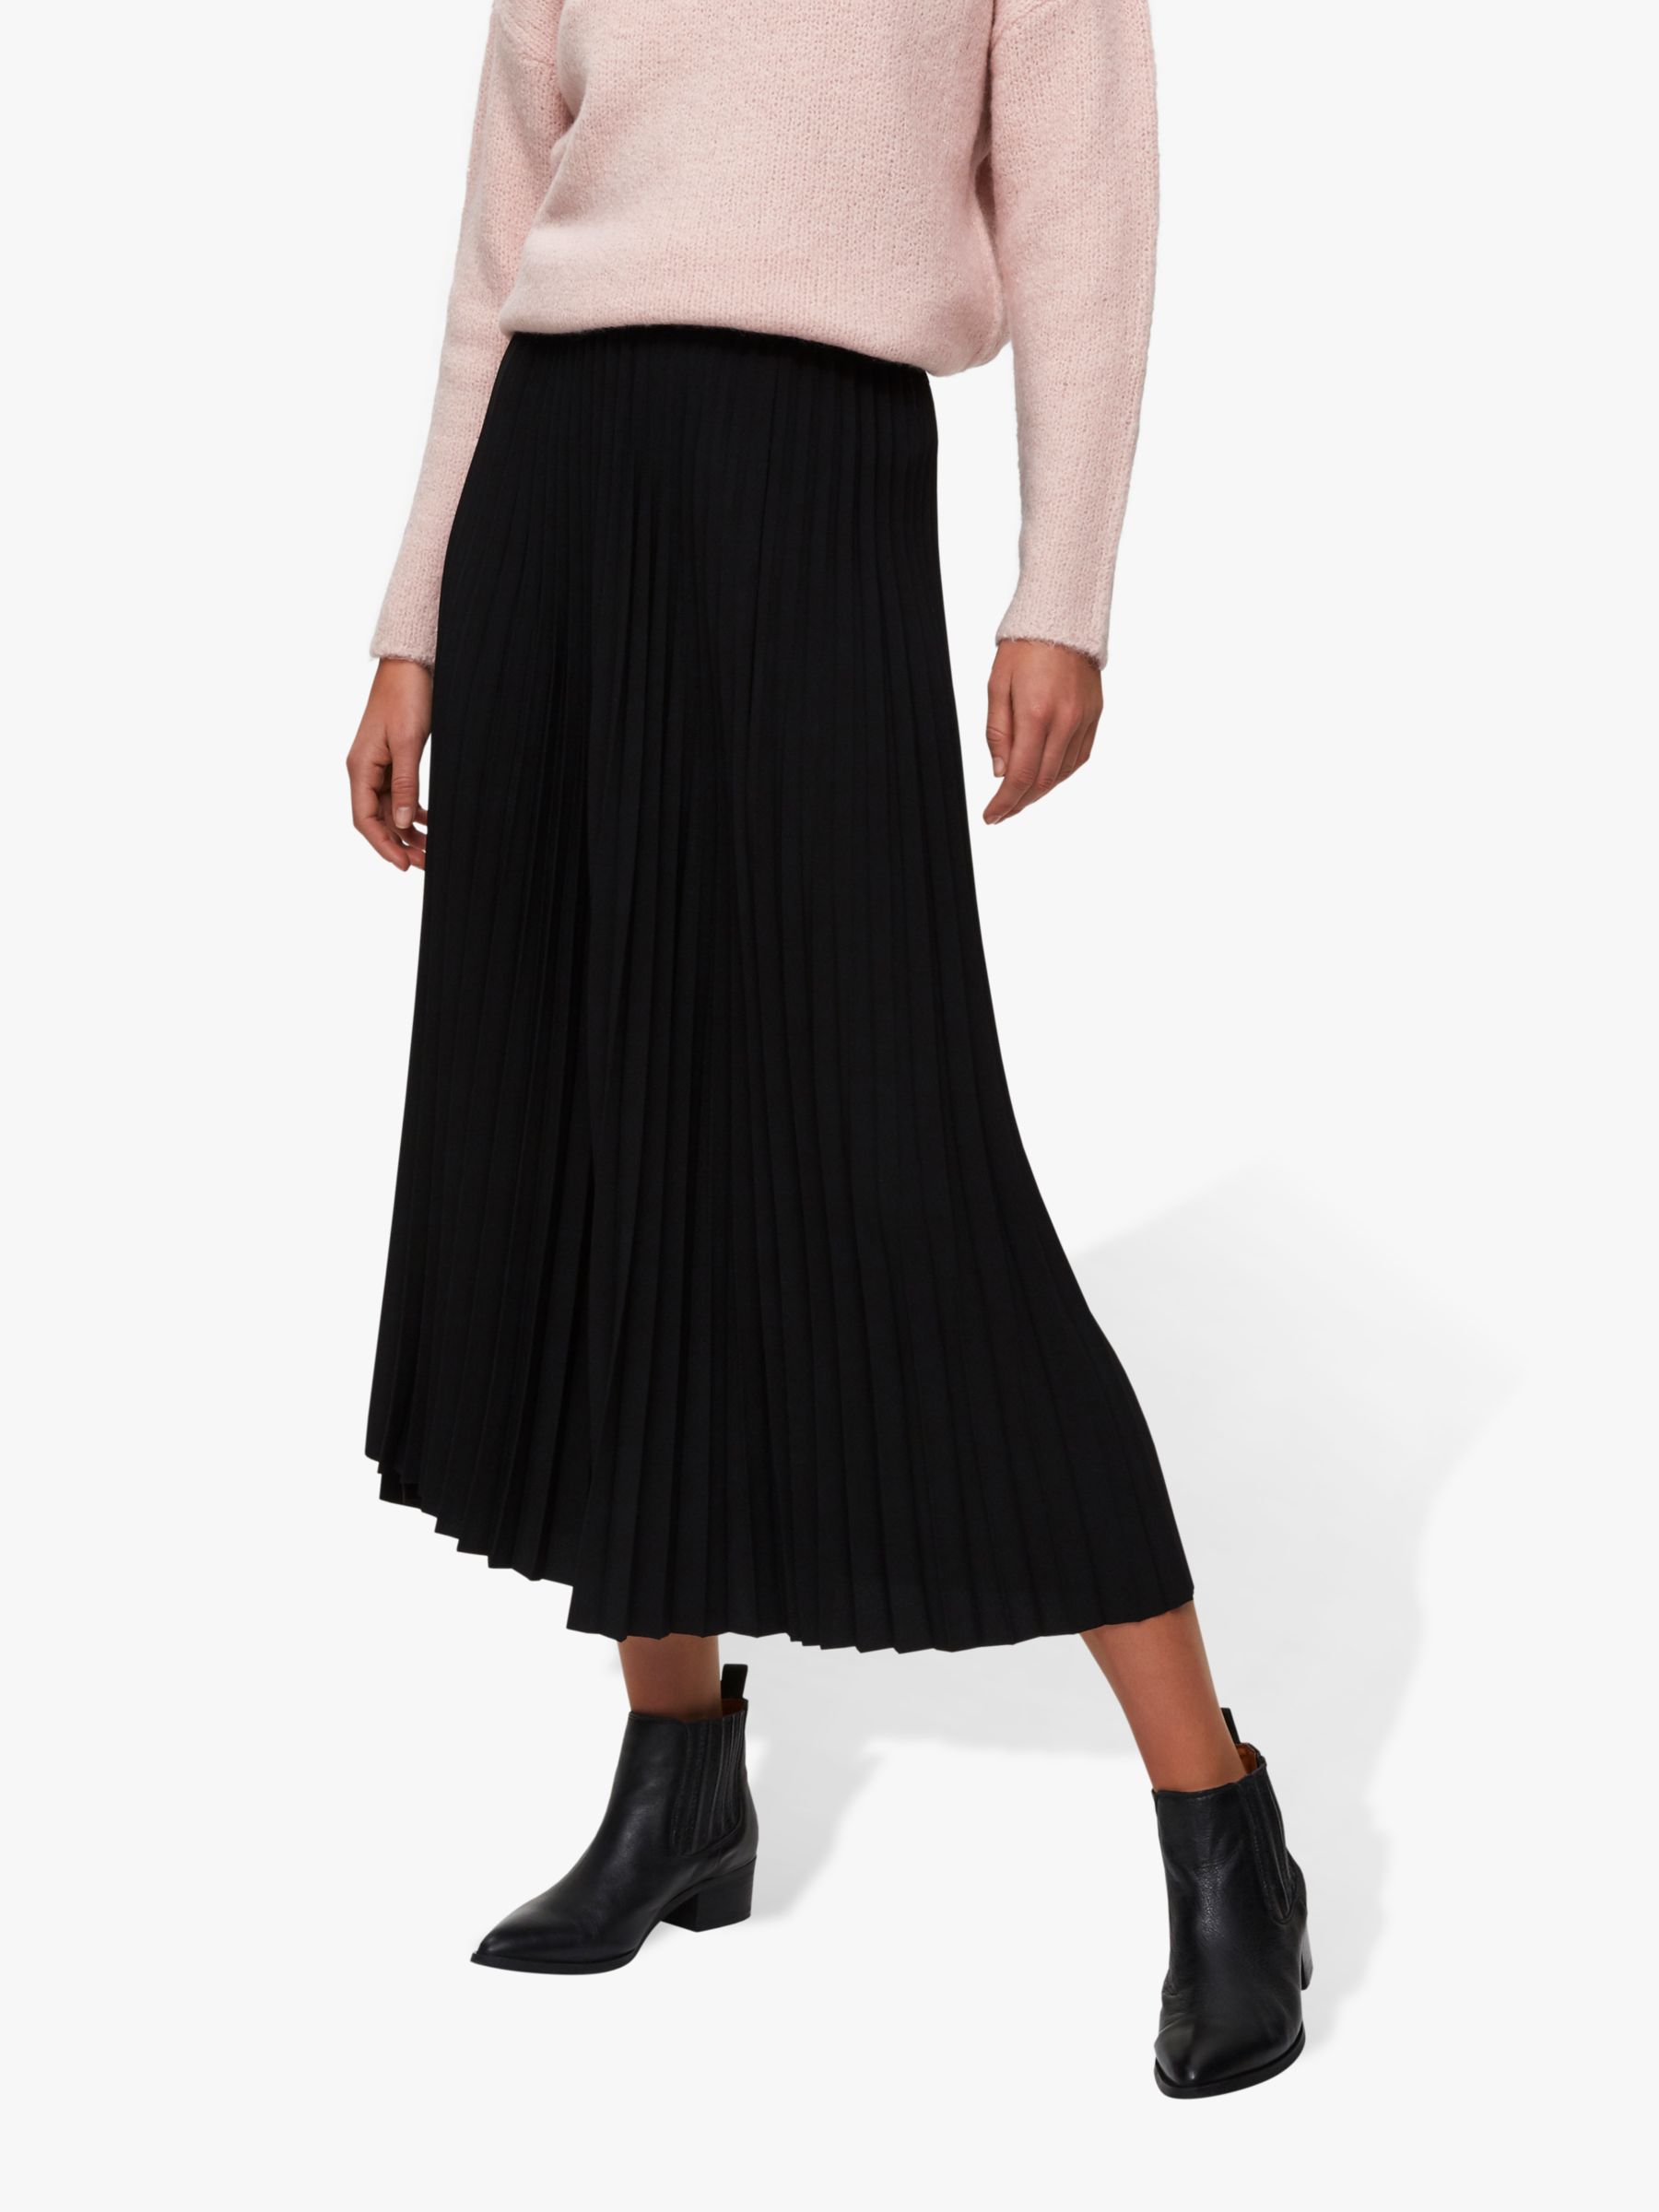 Selected Femme Alexis Pleated Maxi Skirt, Black